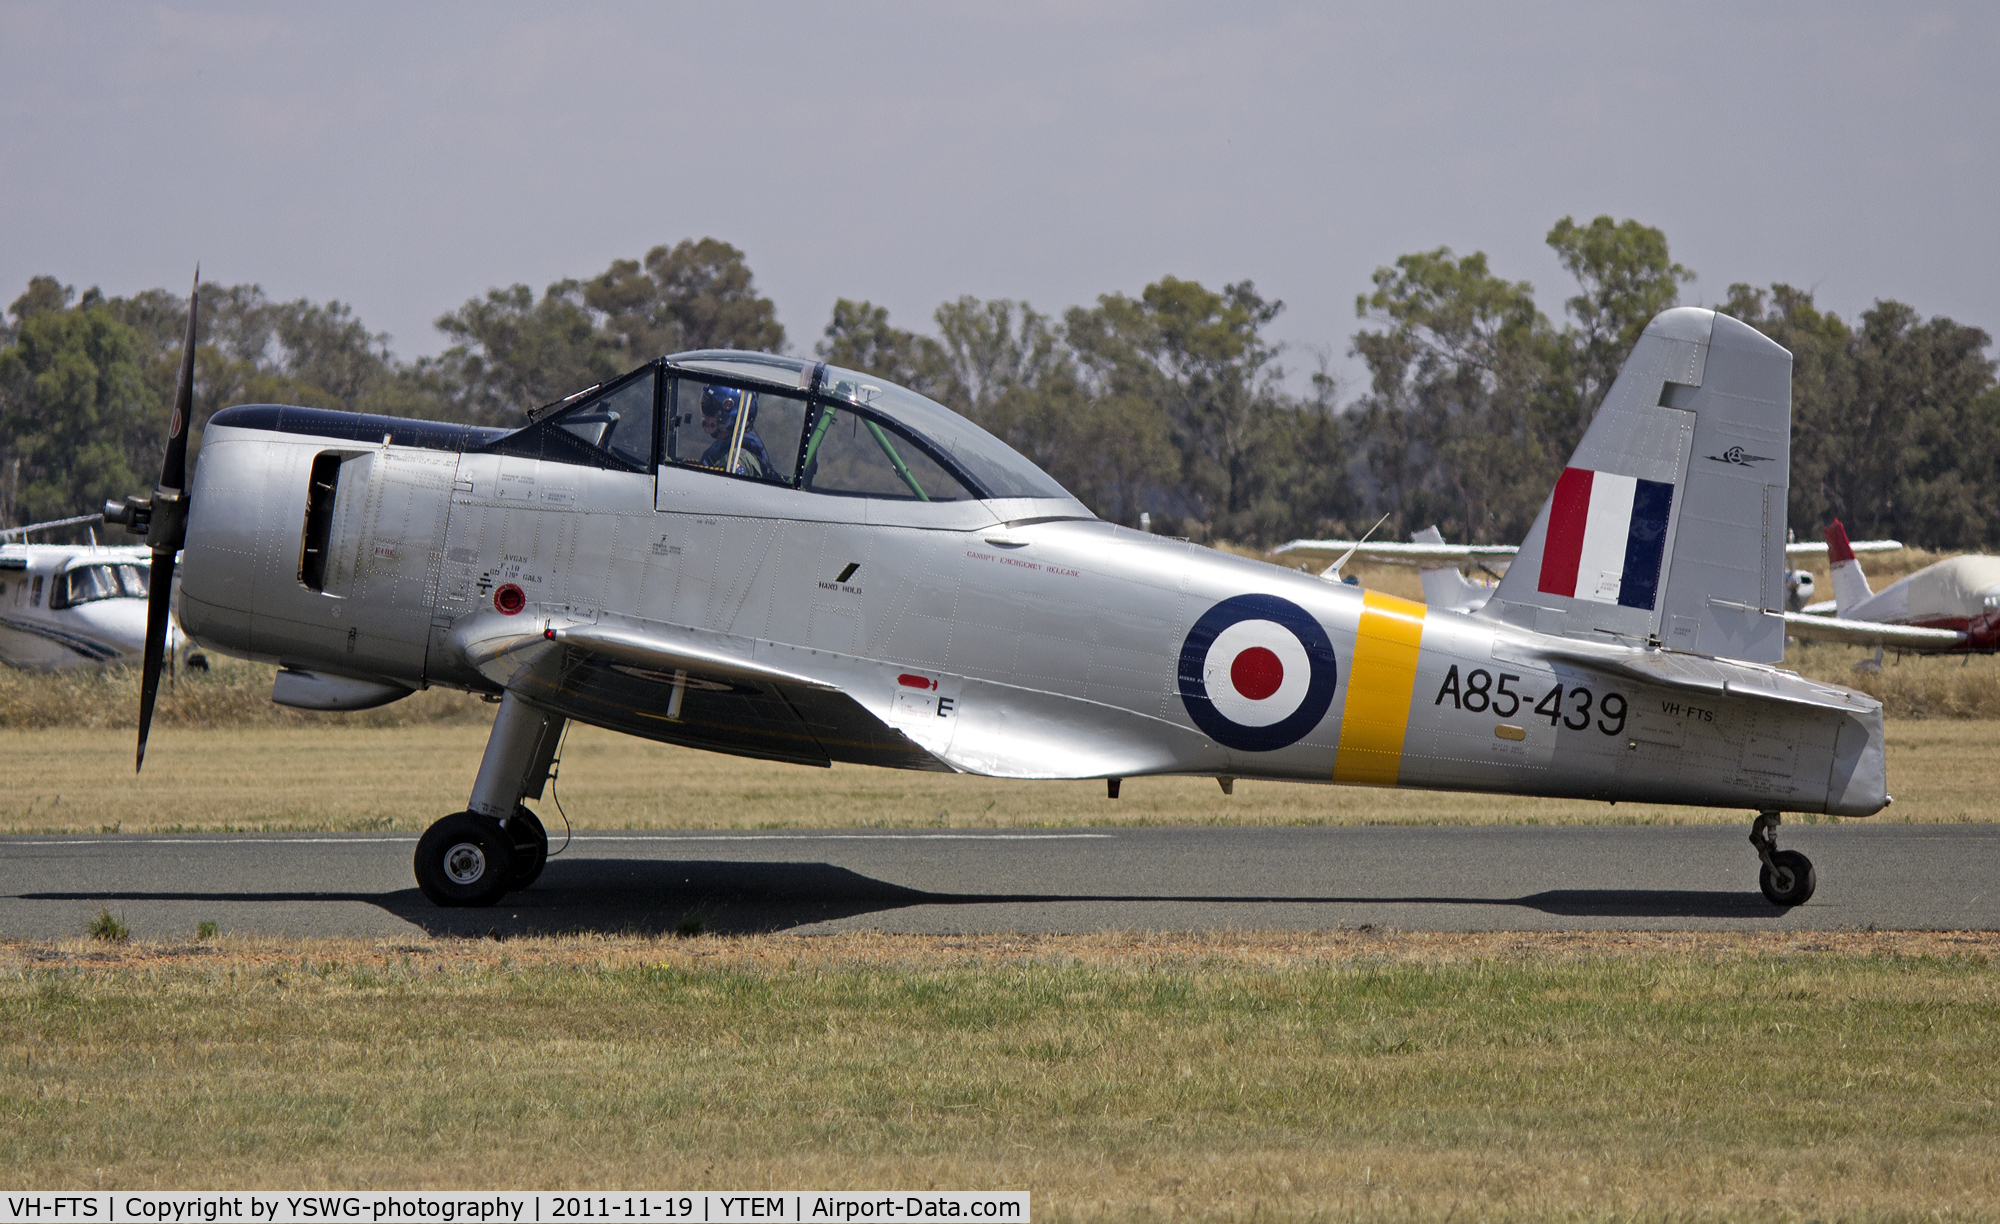 VH-FTS, 1956 Commonwealth CA-25 Winjeel C/N CA25-39, CAC Winjeel CA25-39 A85-439 (VH-FTS) on Runway 36 at Temora.